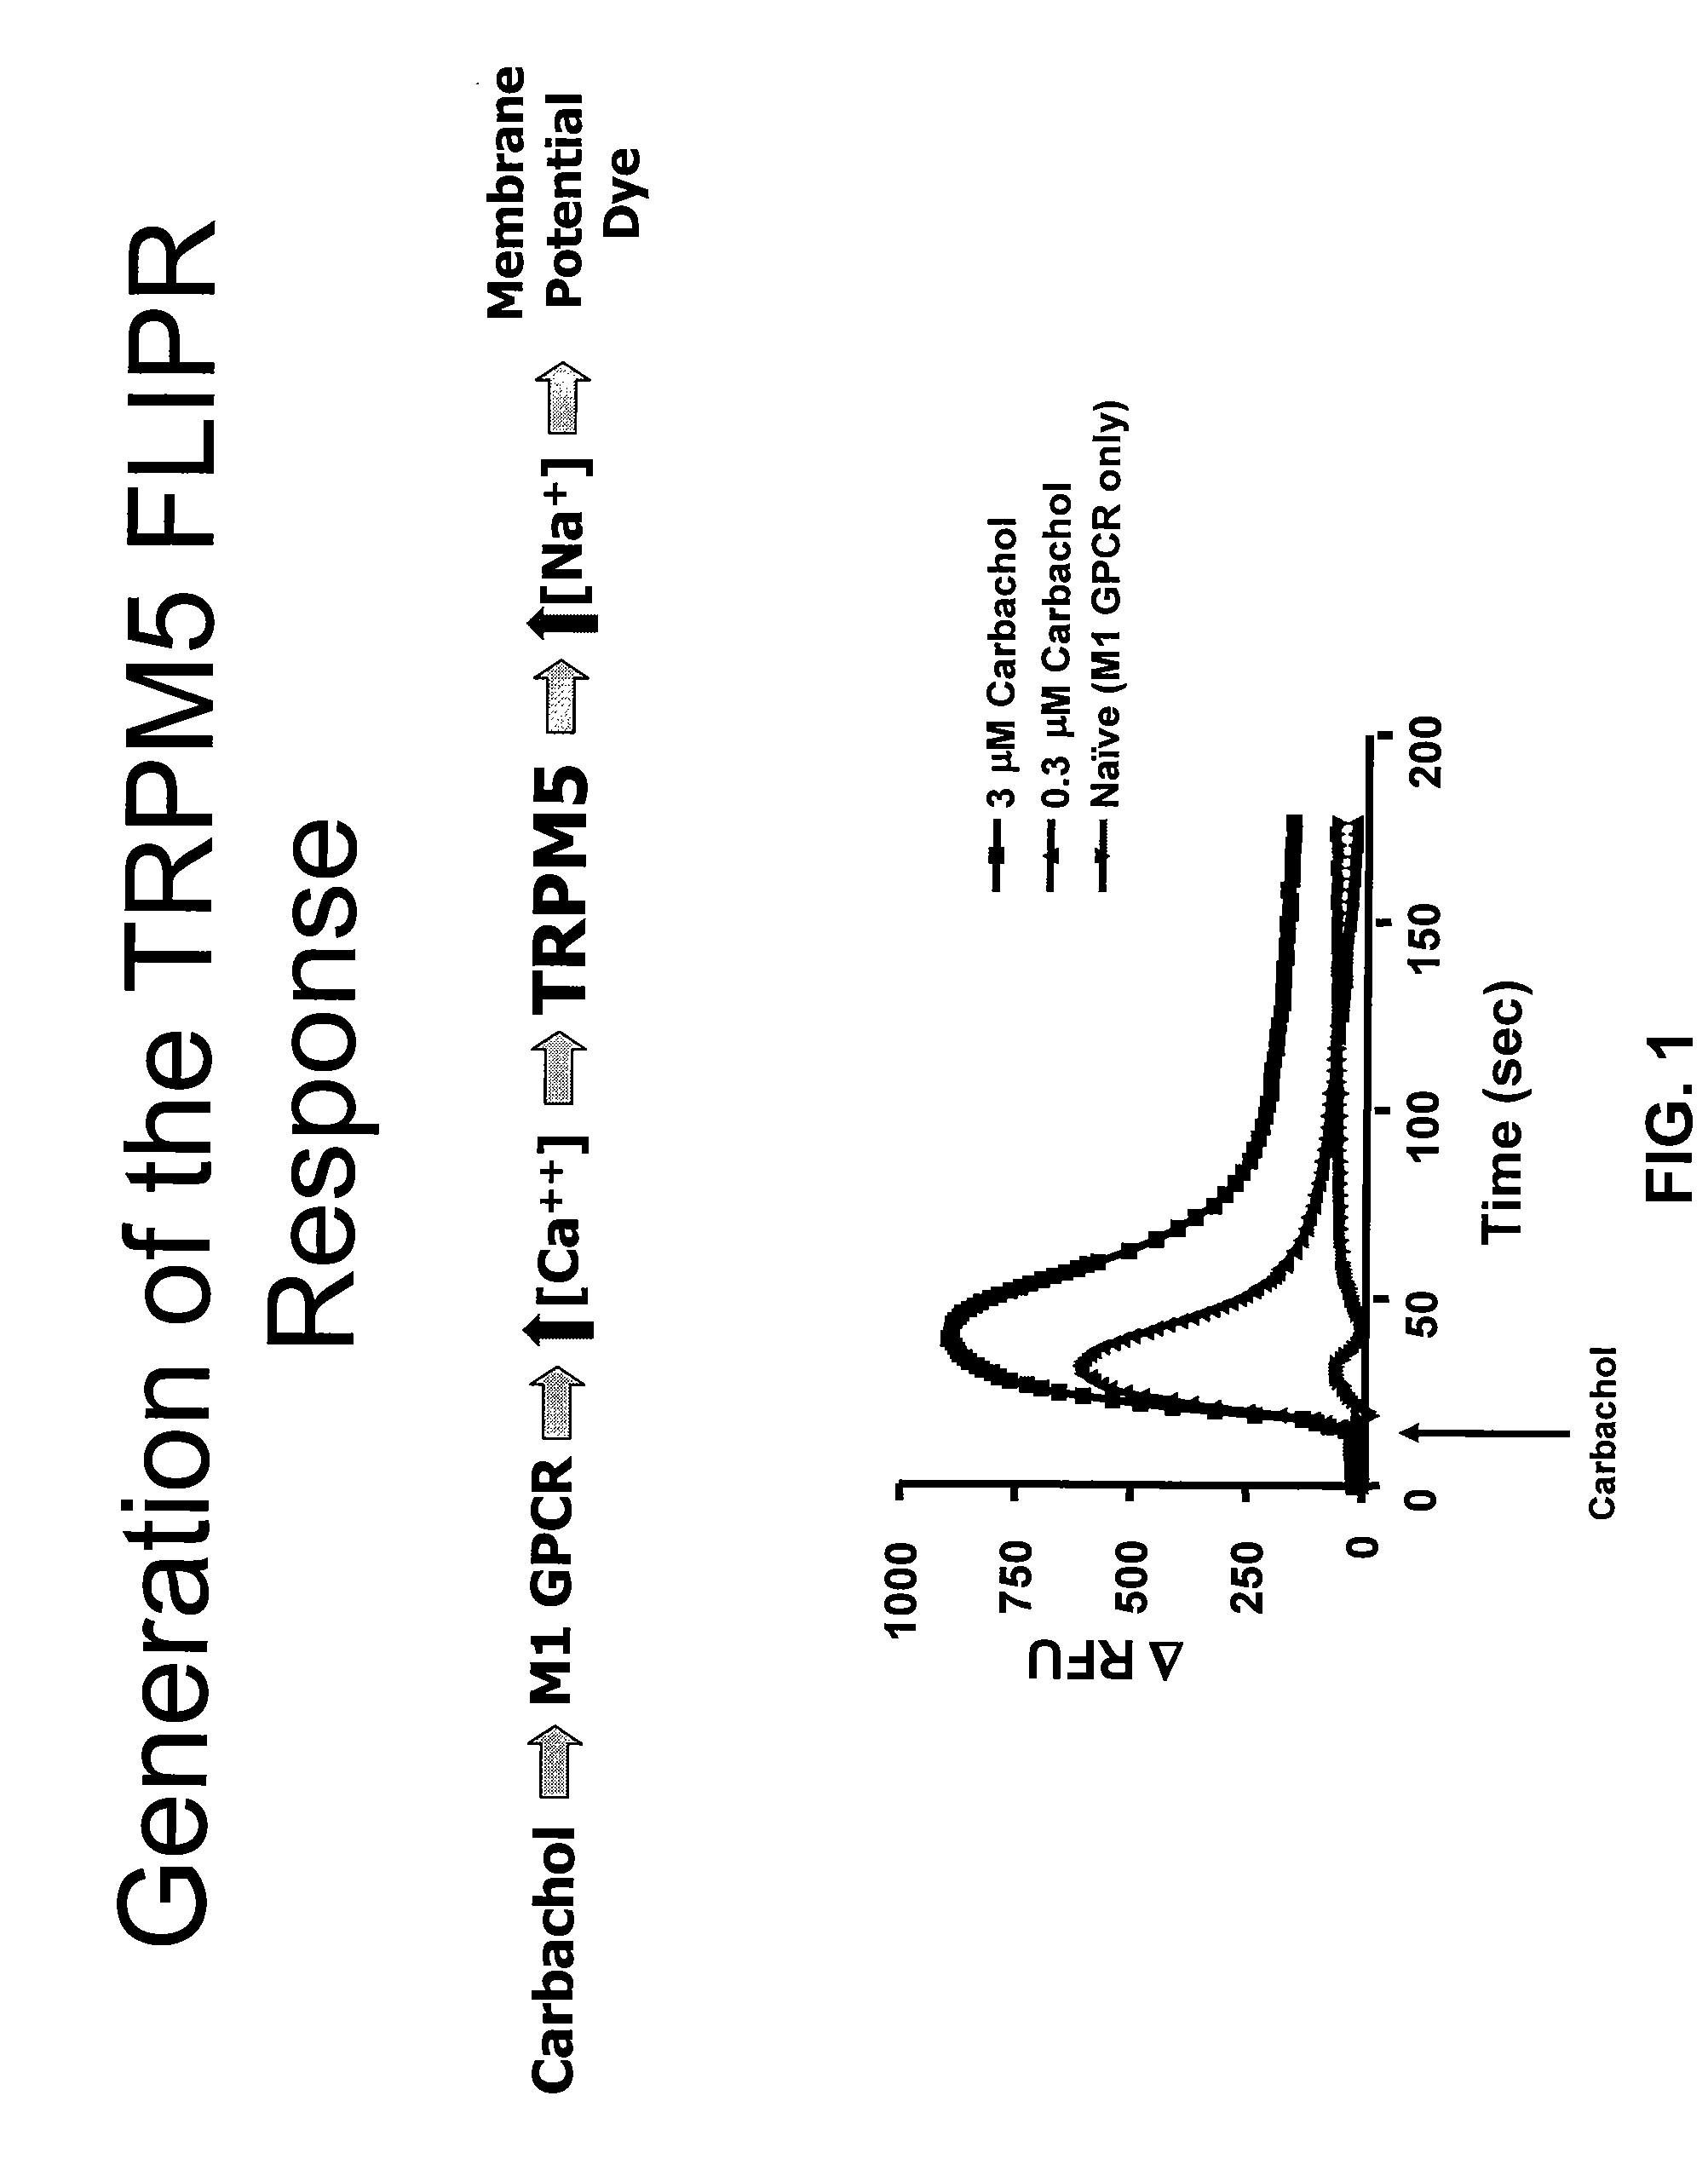 Triphenylphosphine oxide derivatives and uses thereof